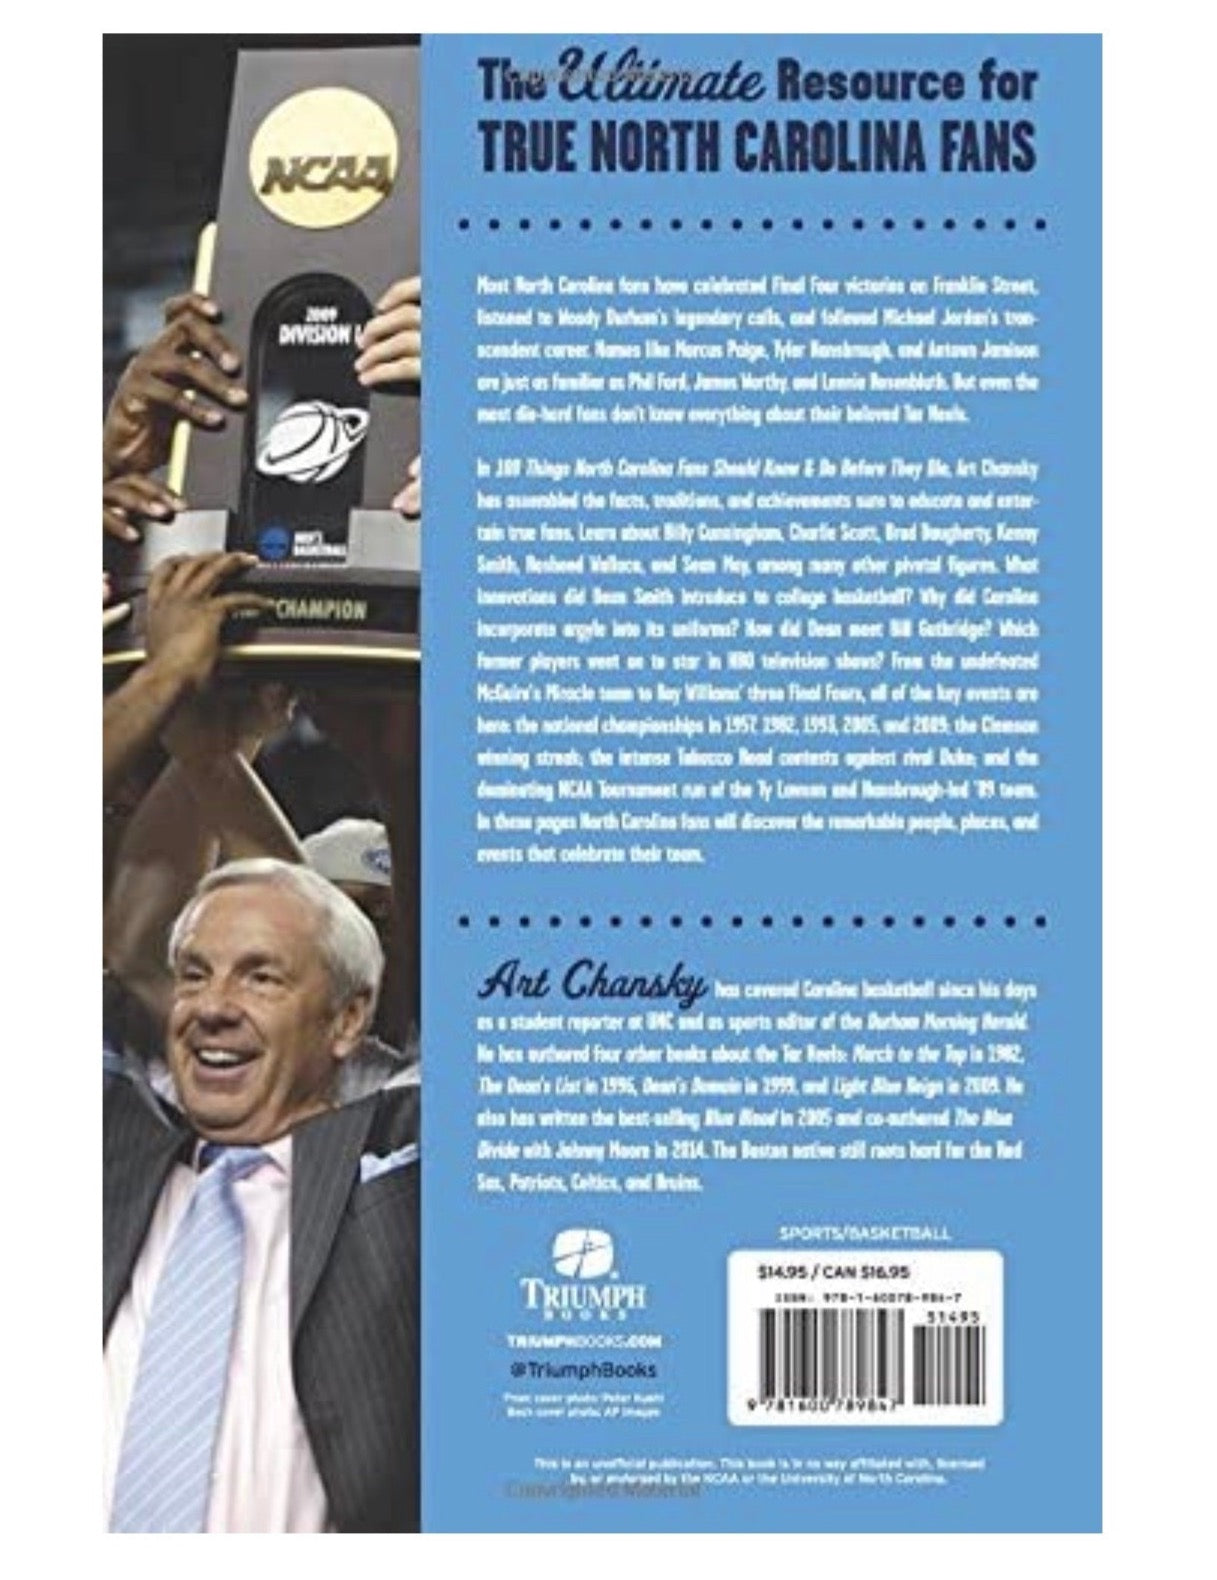 "100 Things North Carolina Fans Should Know & Do Before They Die" Book by Art Chansky